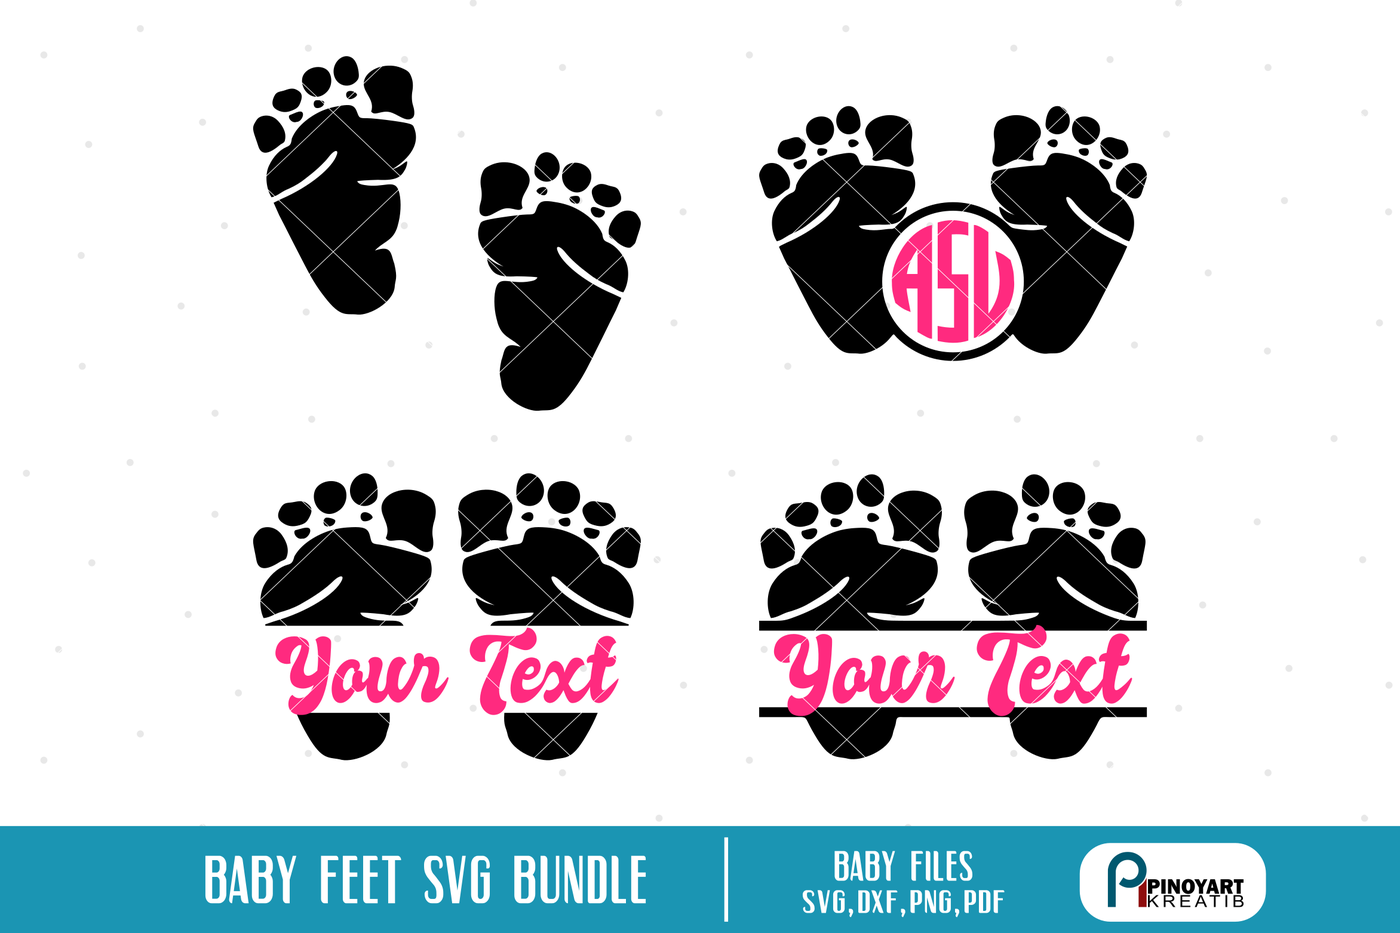 Download baby feet svg,footprints svg,baby feet dxf,baby svg file,baby dxf file By Pinoyart ...